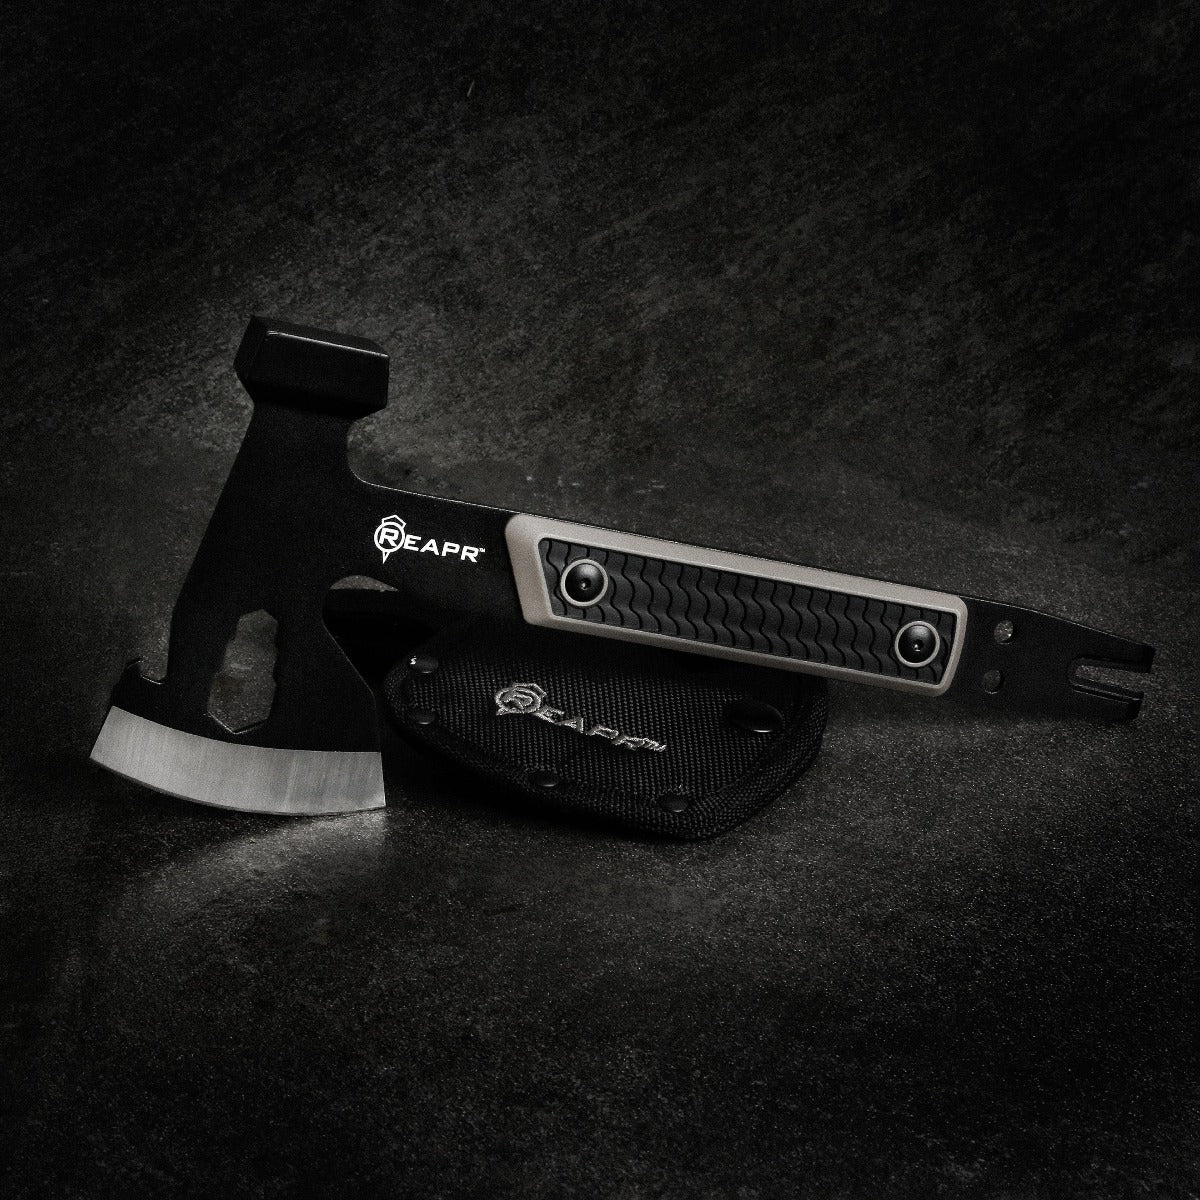 Similar to standard camping axes and hatchets in size, the Versa stands out from the pack to give you not only a 3″ axe head, but a 3-wrench set (10 mm, 13 mm, 16mm), cast hammer, pry bar, nail puller and a bottle opener. www.defenceqstore.com.au